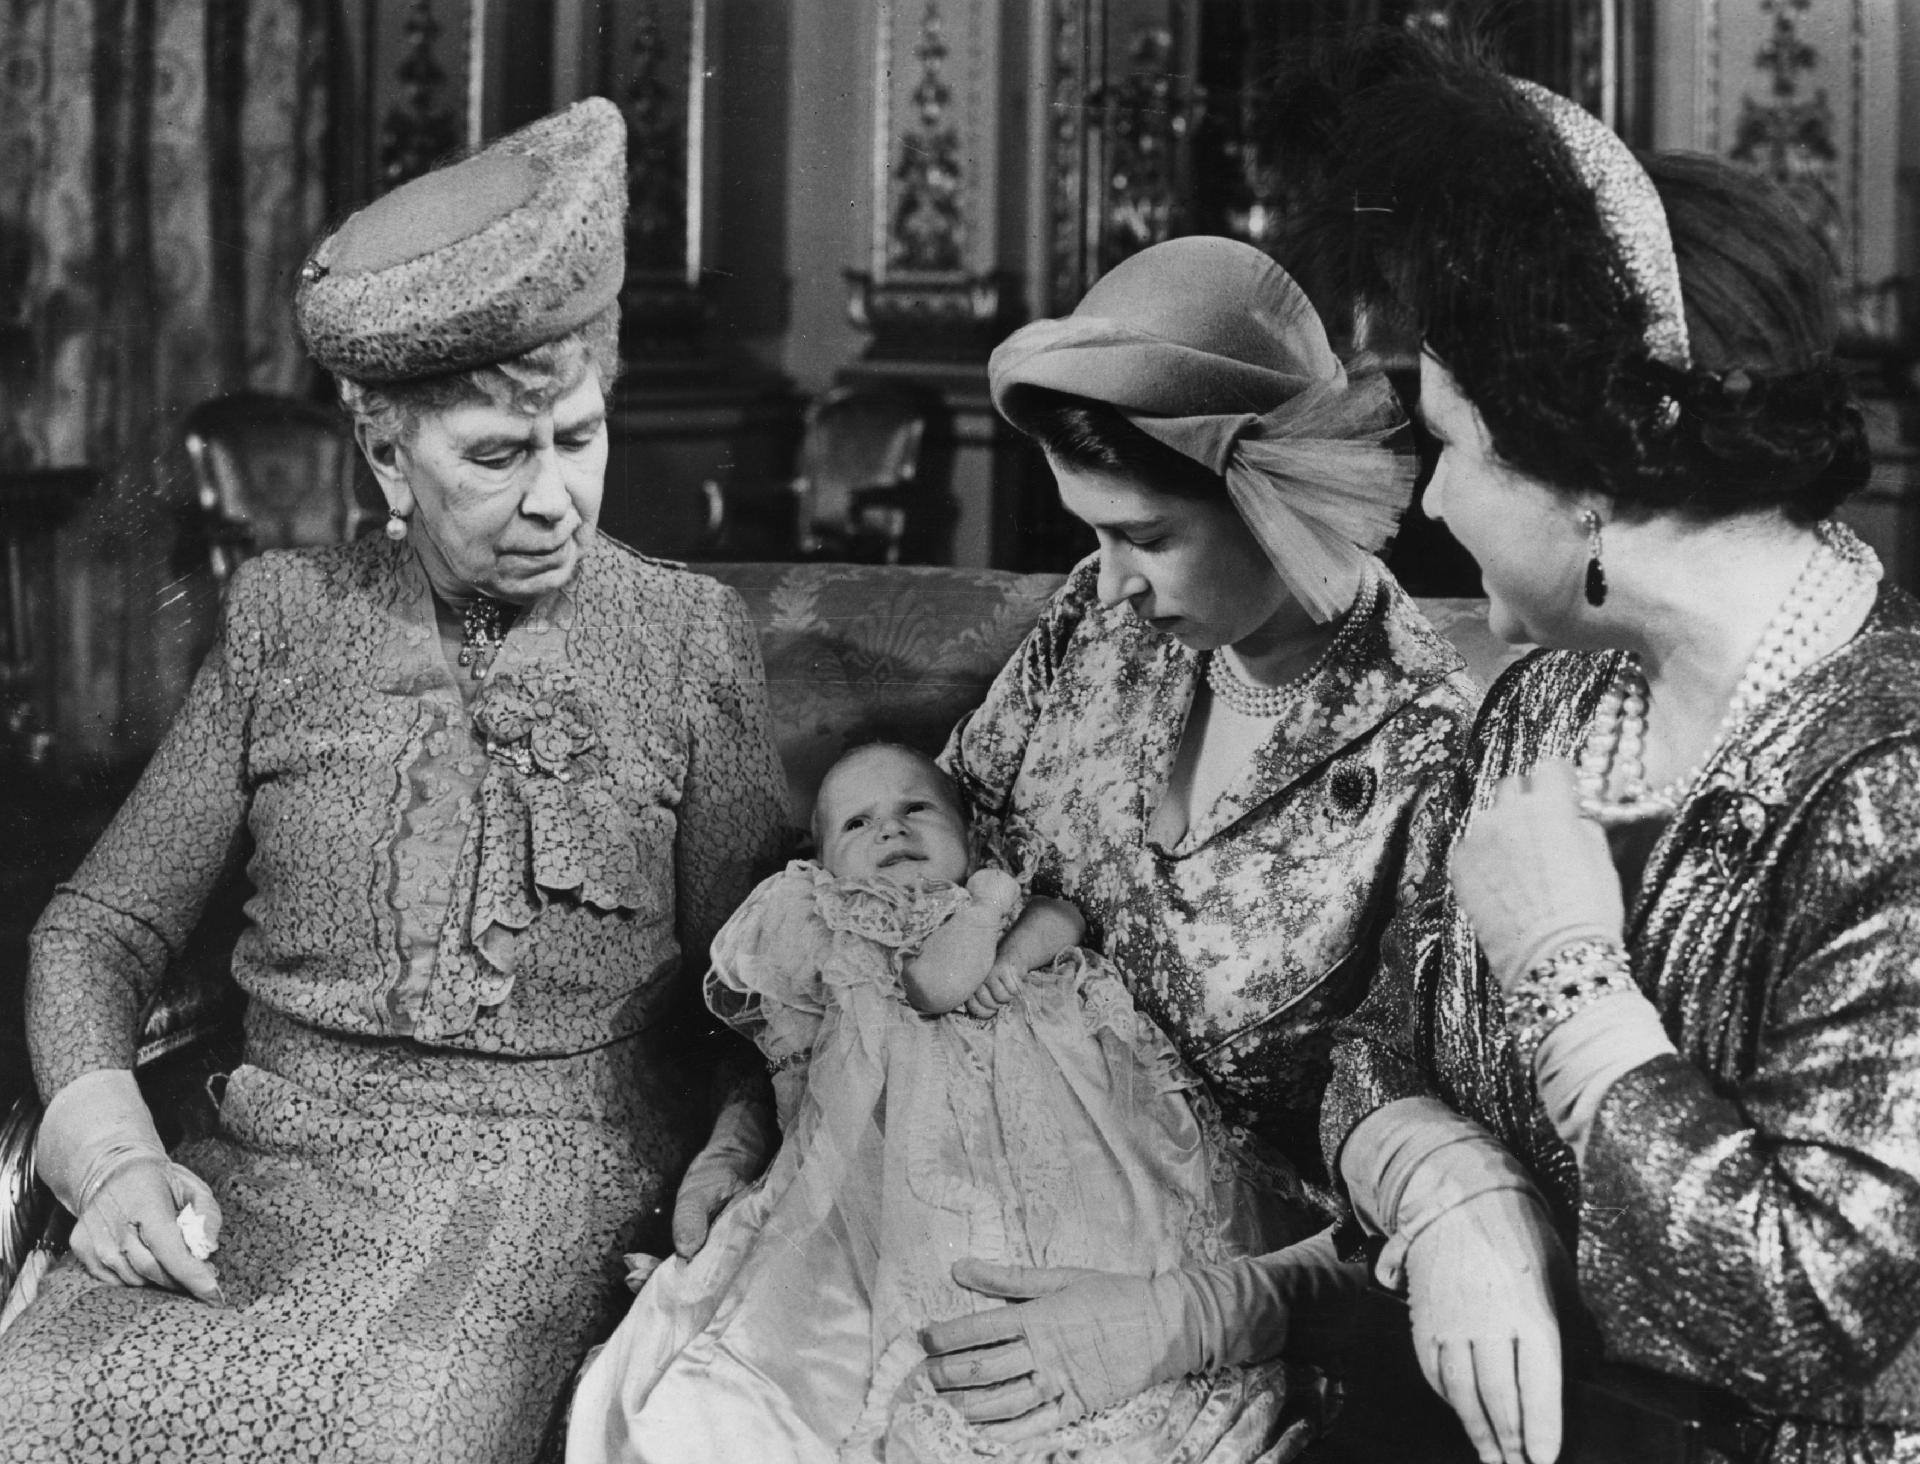 Four generations of the British royal family: Queen Elizabeth II with her daughter Anne in her arms, accompanied by her mother and grandmother.  - Keystone/Getty Images